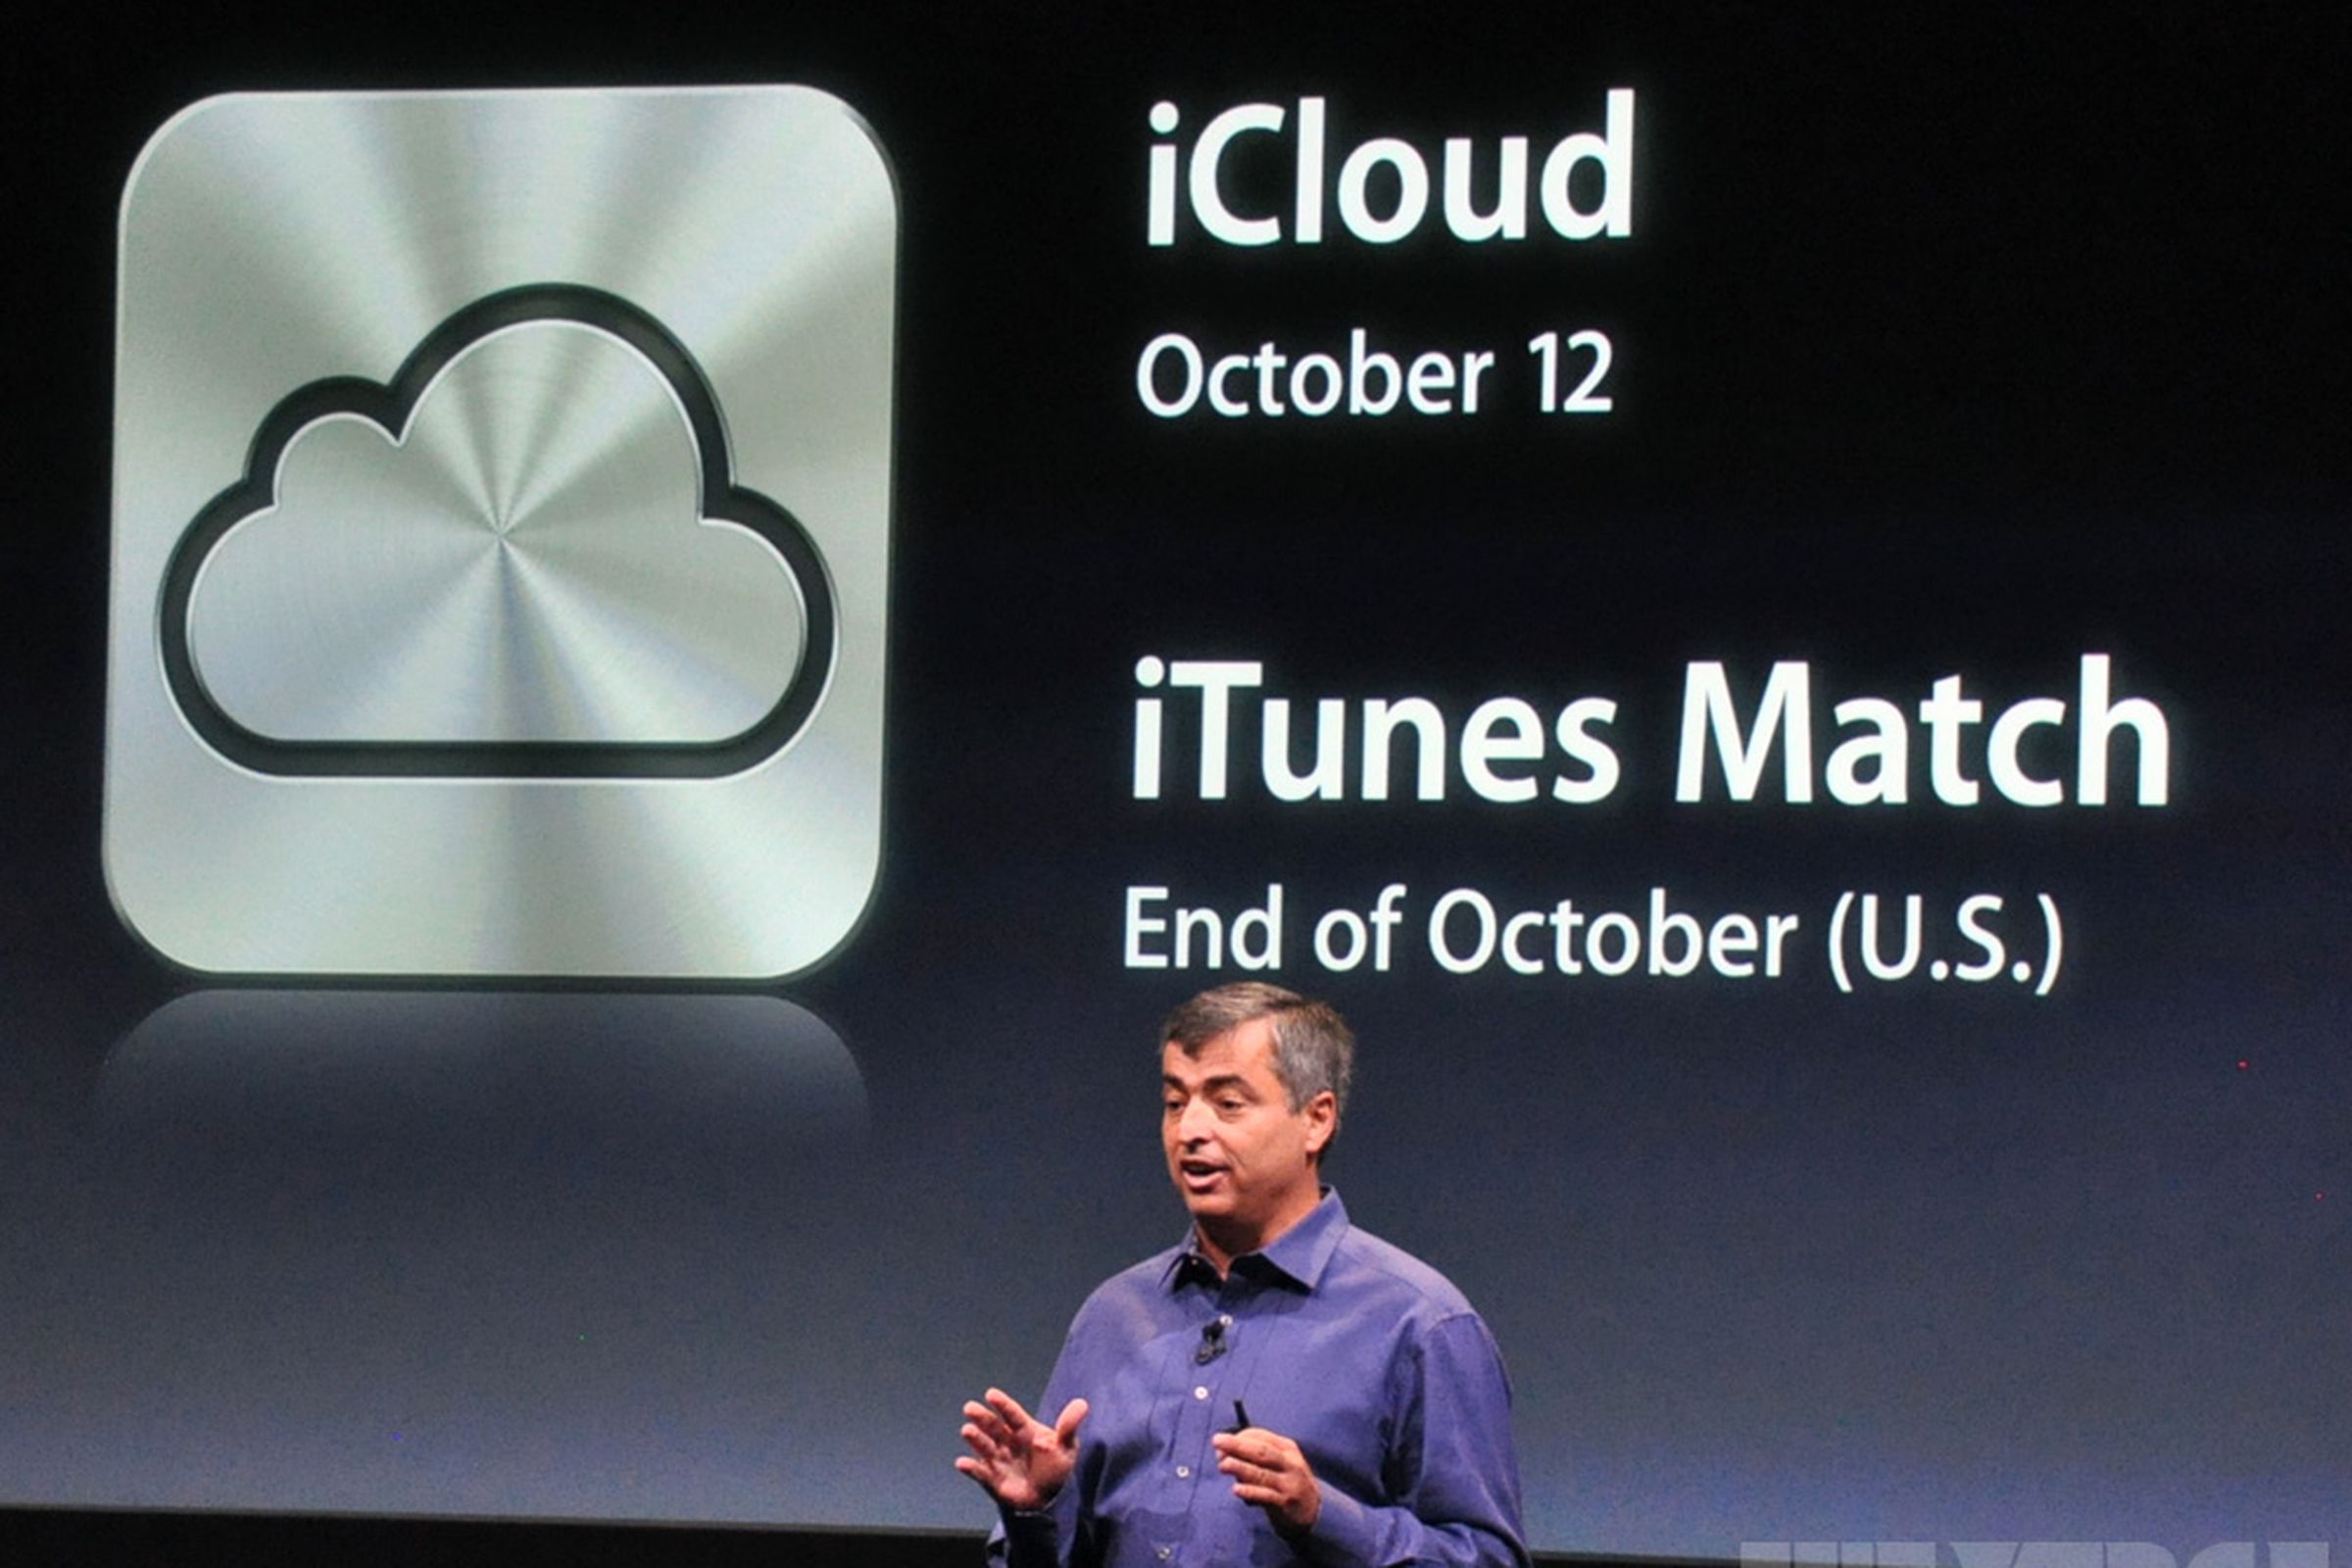 iCloud and iTunes Match slide from Apple's iPhone 4S event 2011